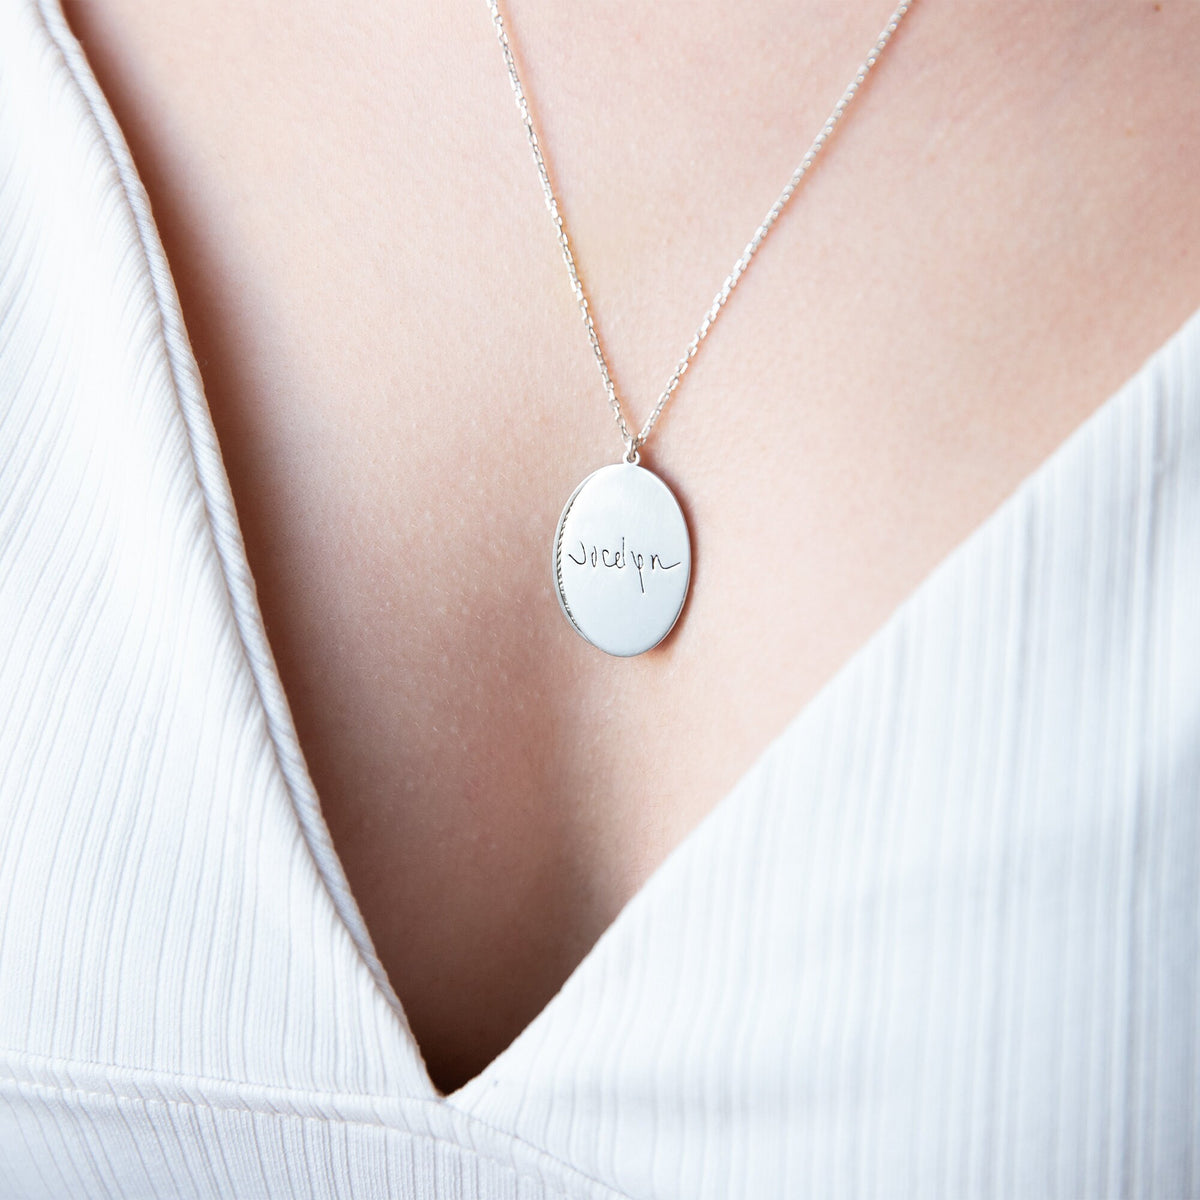 Personalized Actual Fingerprint and Handwriting Necklace • Custom Oval Memorial Necklace • Keepsake Necklace in Sterling Silver, Gold, Rose